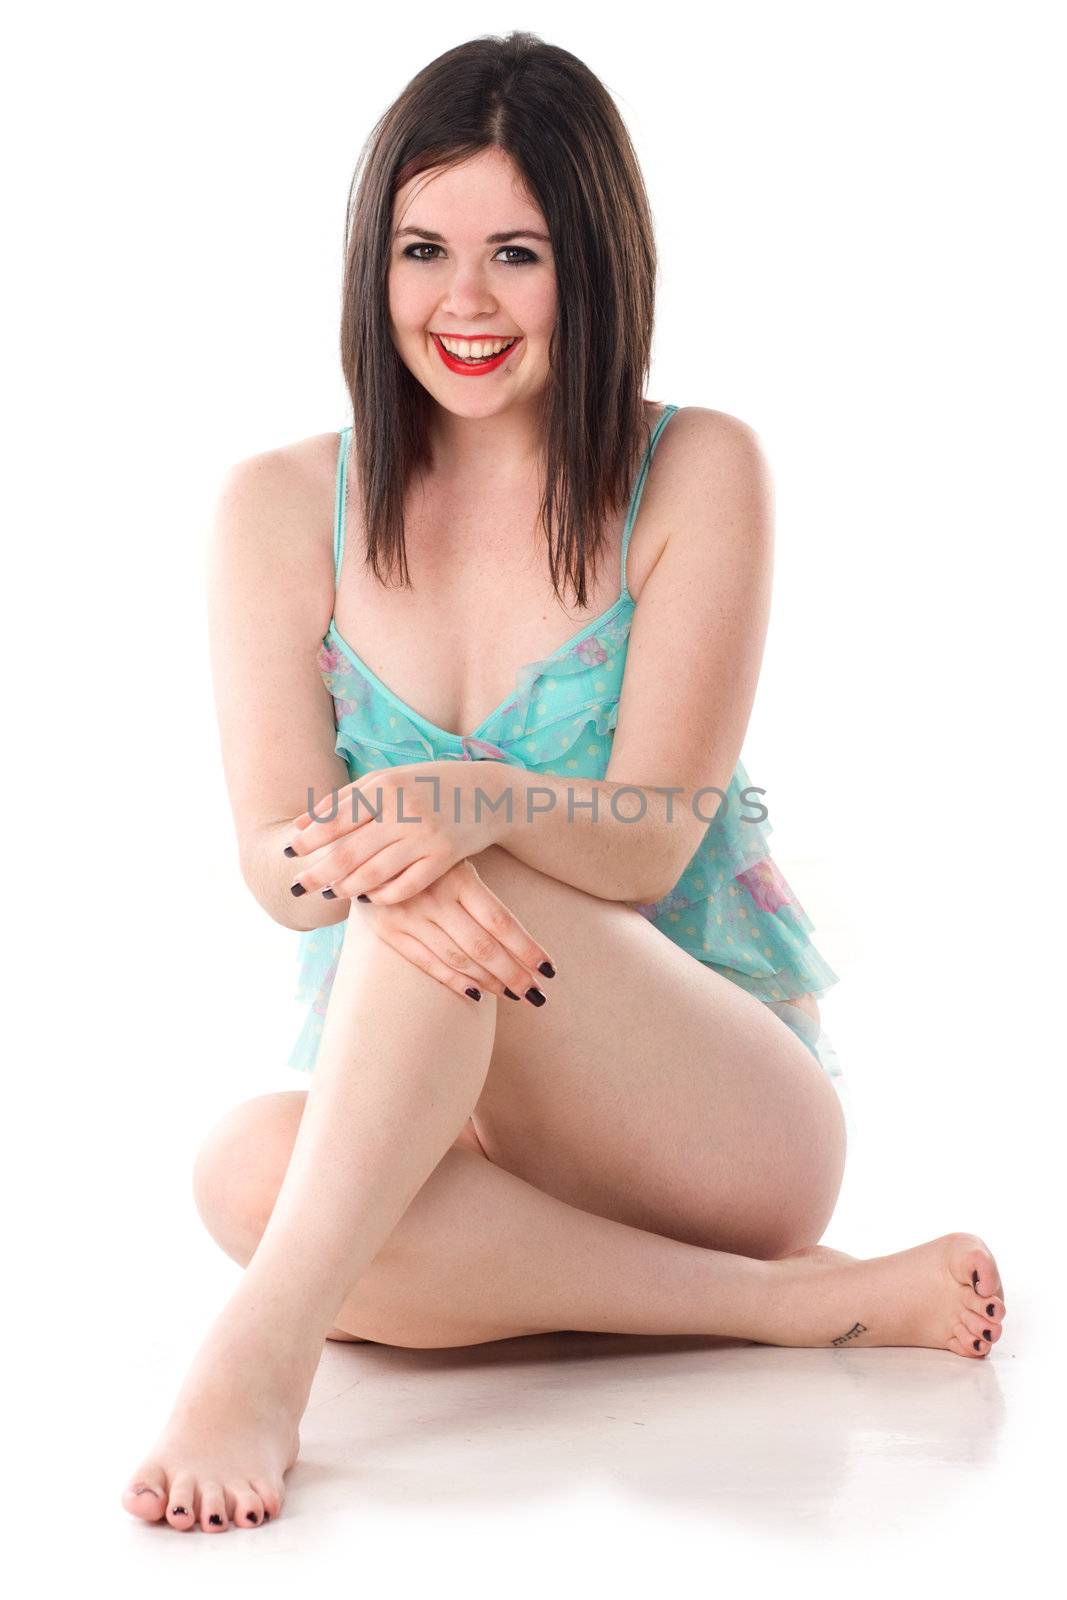 cute girl in pin-up pose in lingerie